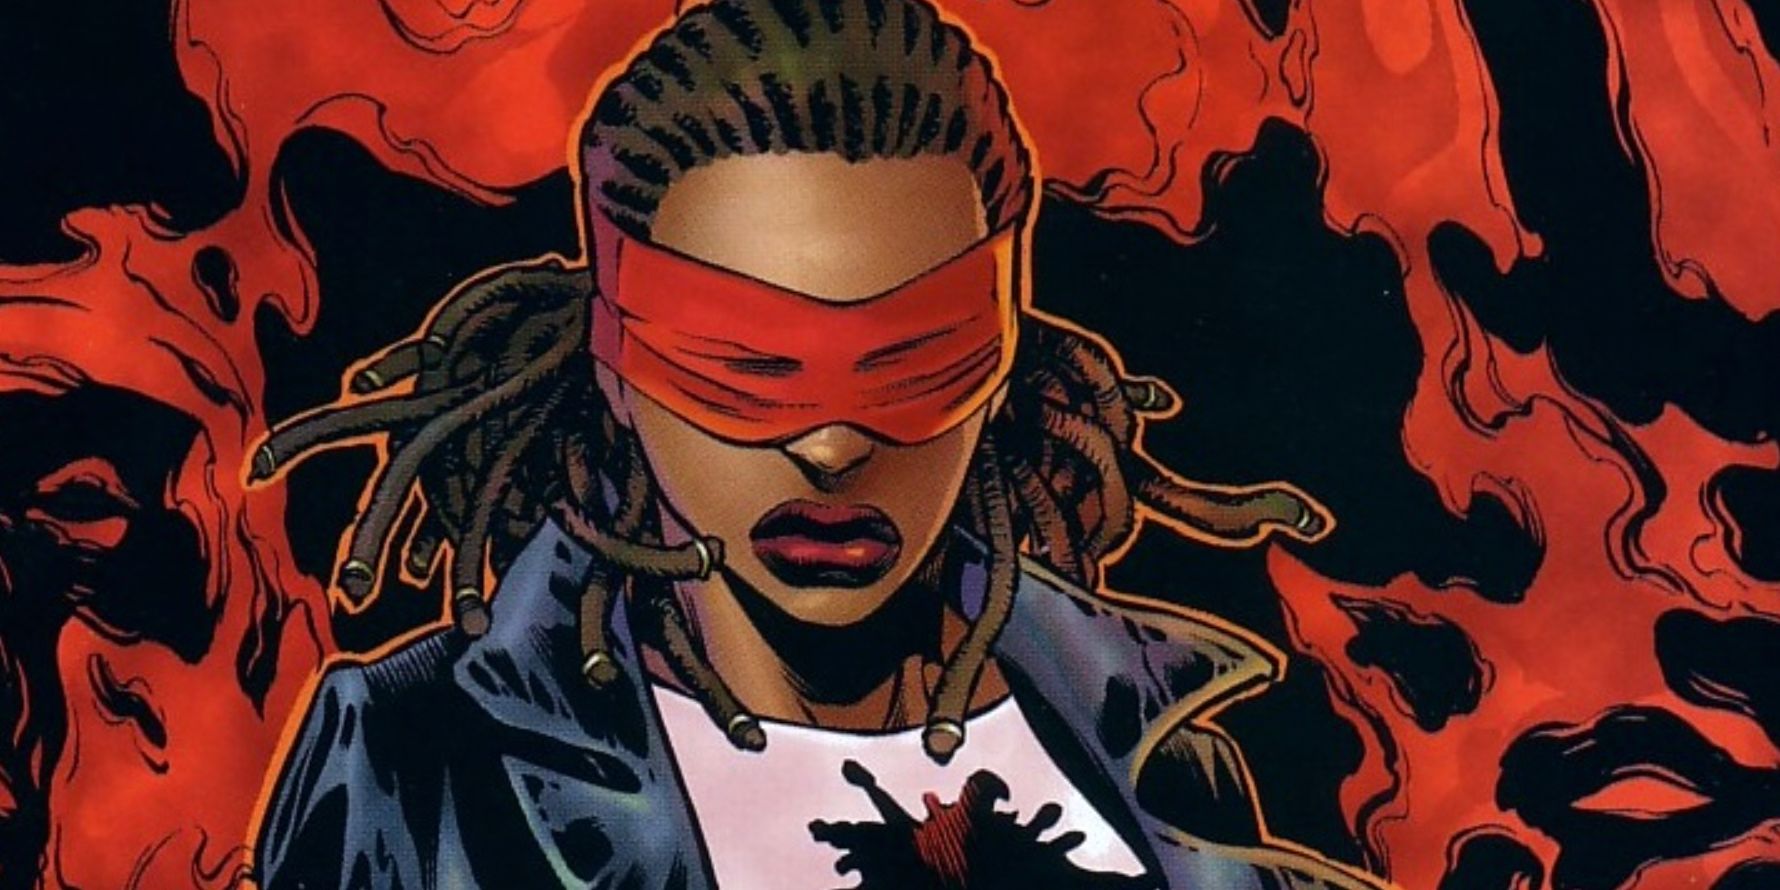 Jill Carlyle wearing a red eye mask as the Crimson Avenger in DC Comics